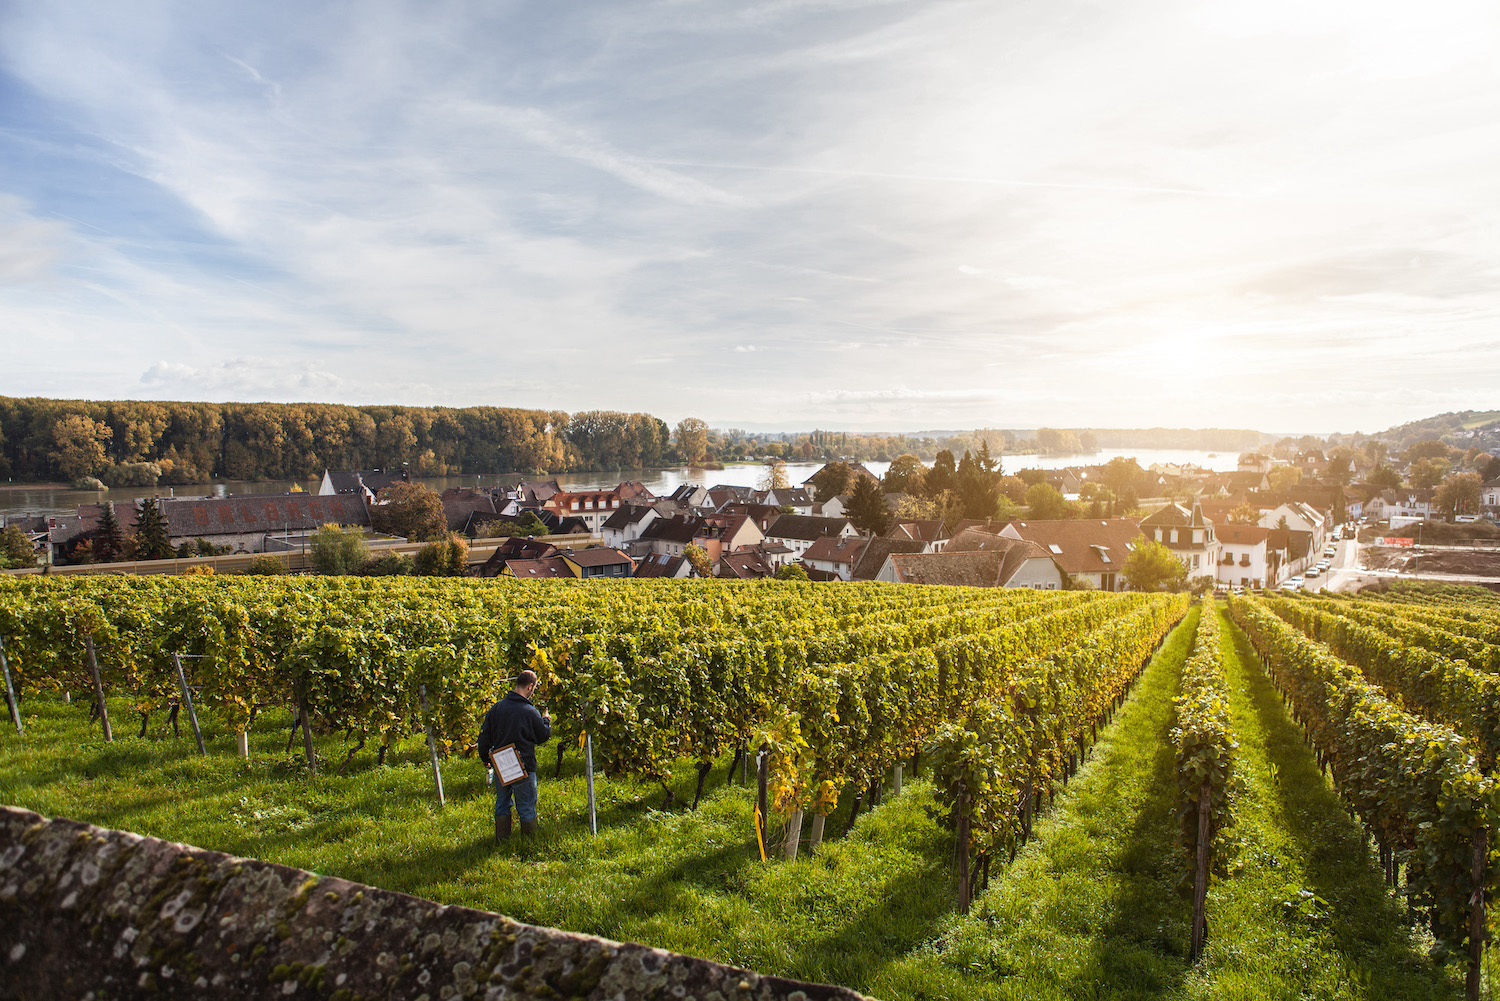 In the foreground, the rows of vines of the legendary Niersteiner Glöck vineyard during twilight in early autumn.